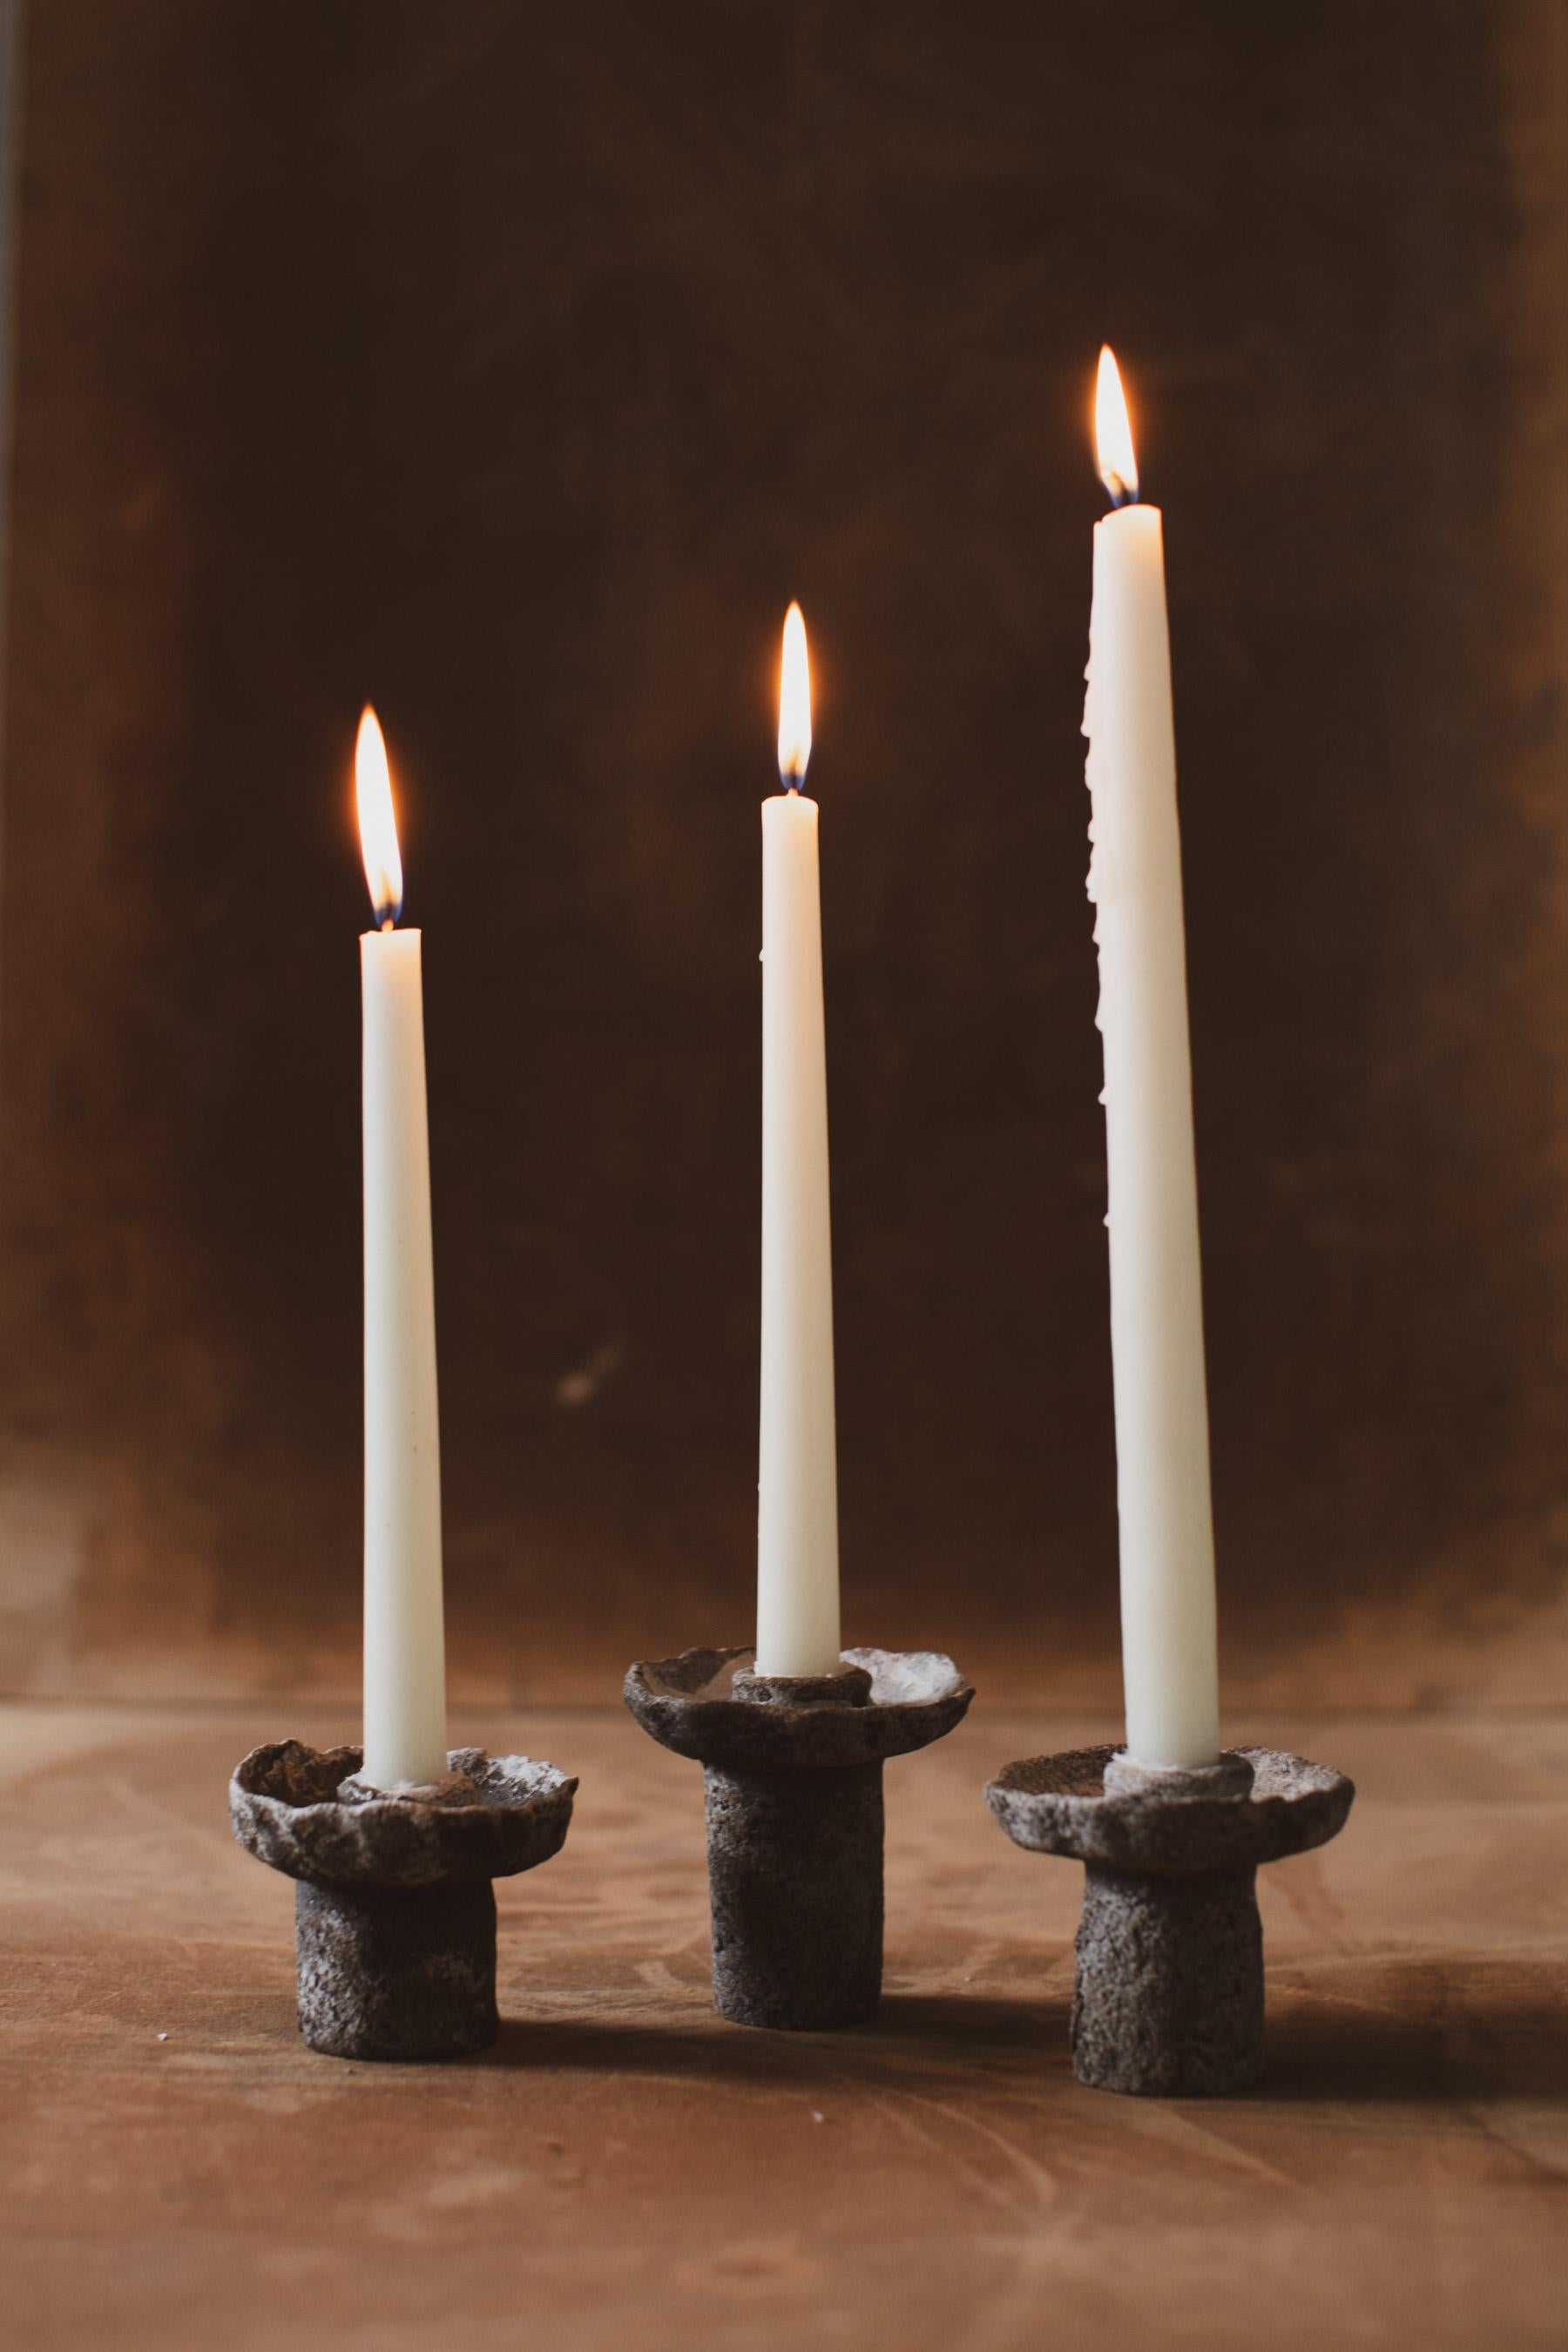 American Handmade Ceramic Candlestick Holders by Mugly, NYC For Sale